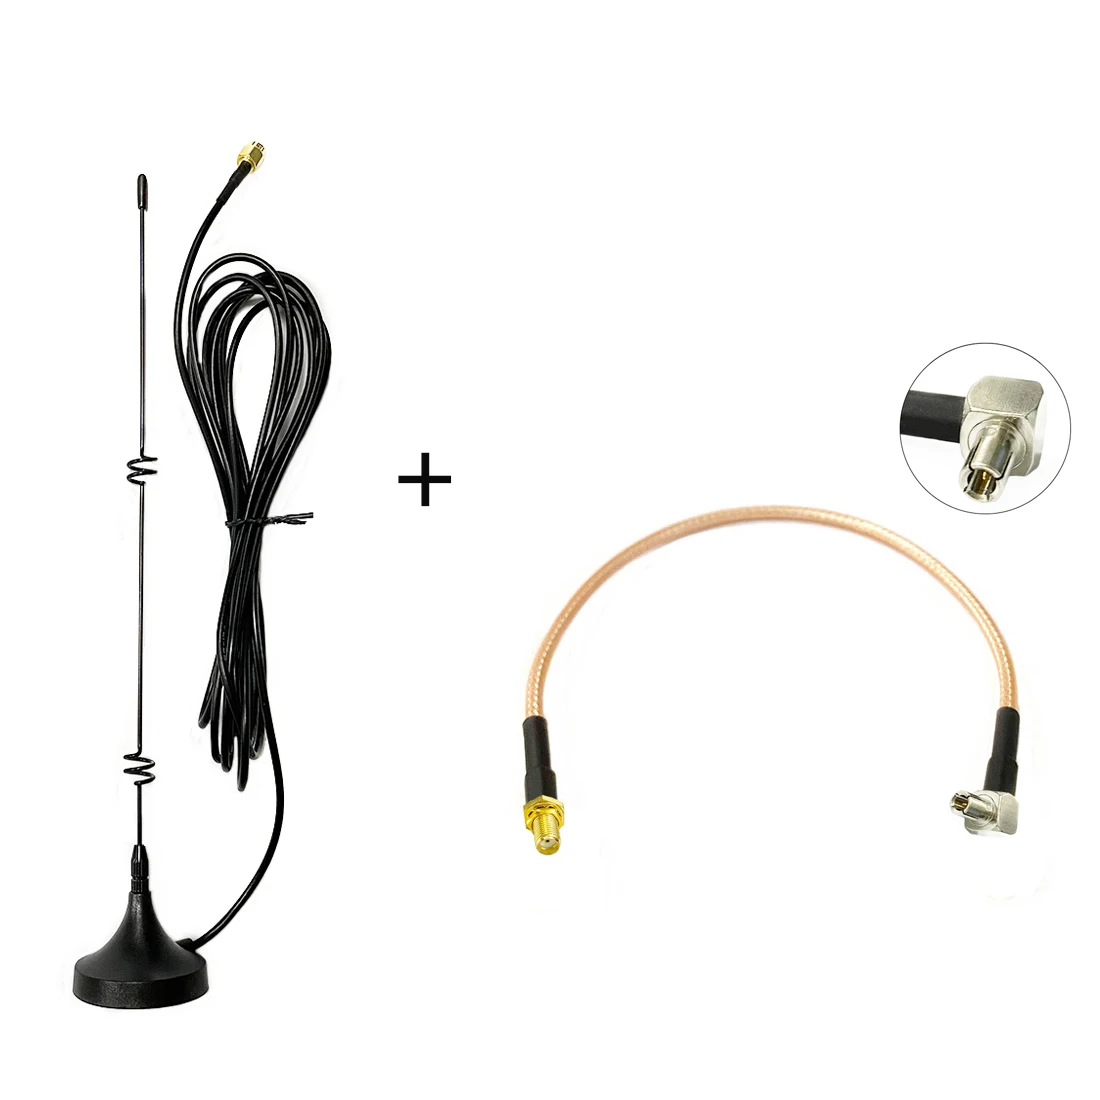 4G 3G GSM Antenna 6dbi High Gain Magnetic Base with 3meters Cable SMA Male +SMA Female Connector  to TS9 Male RG316 Cable 15cm complete 3meters 10feet north nt 1 nt1 mig welding torch air cooled welding gun with cable fitting connector